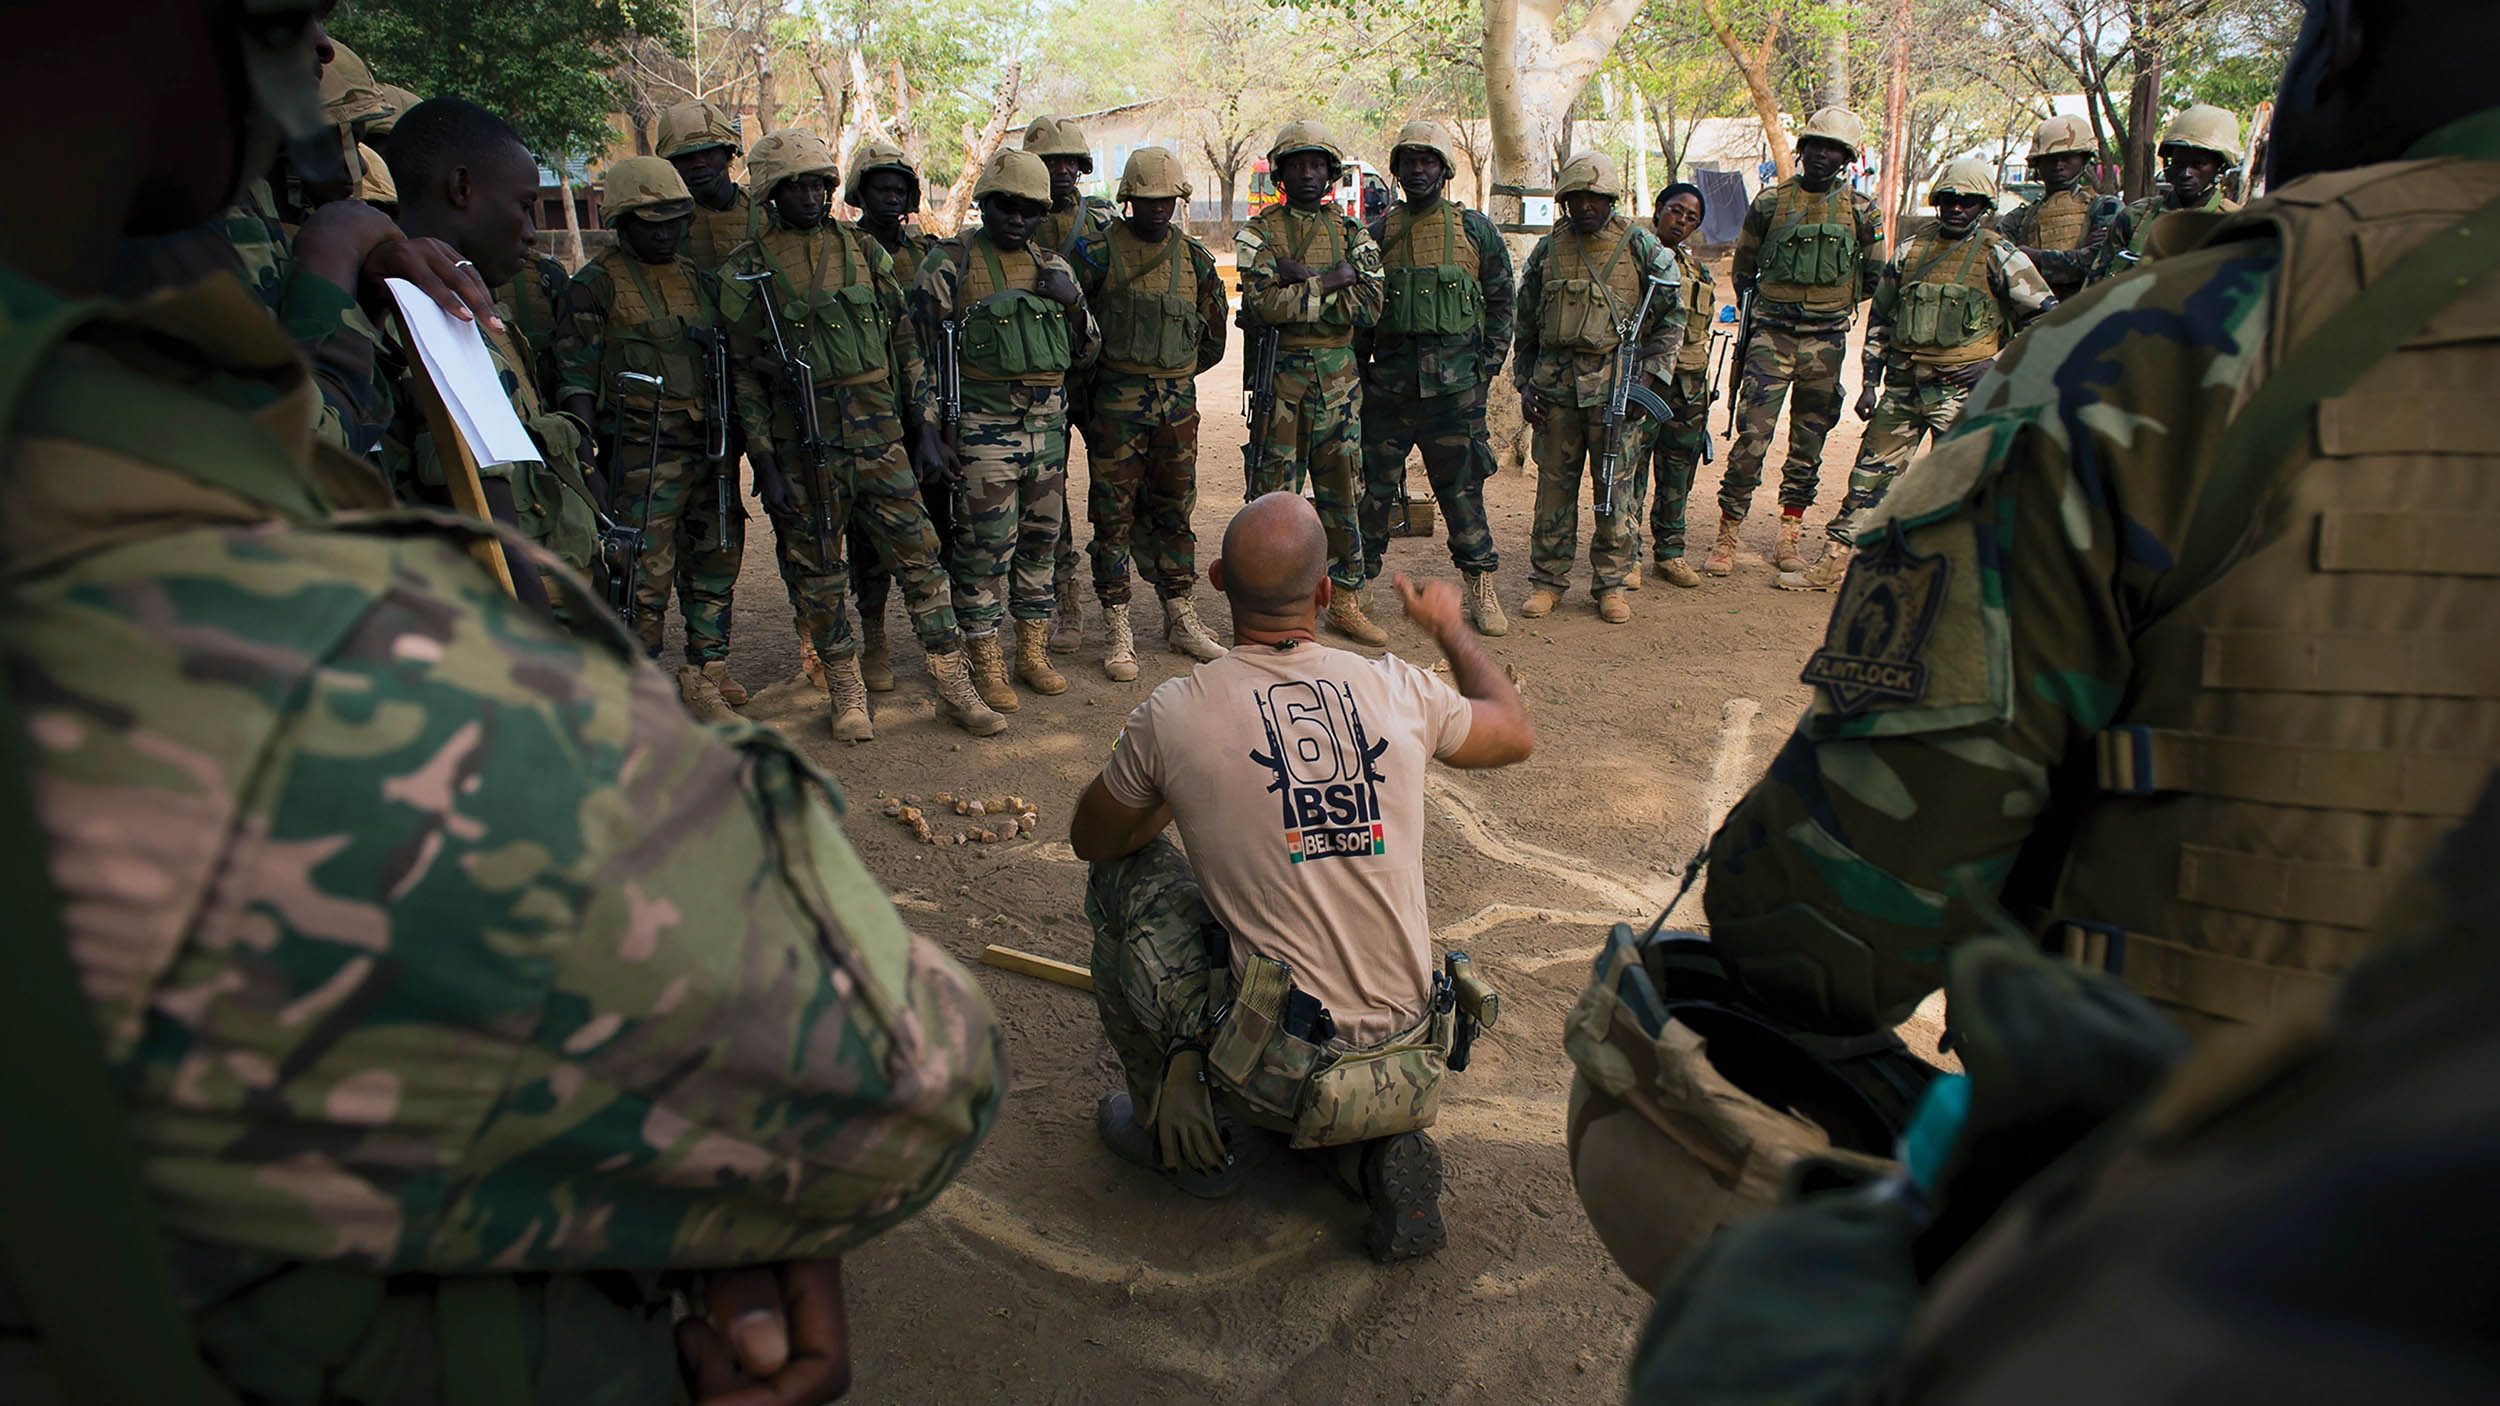 Belgian special forces advise Nigerien soldiers during class on ground movement and attacking an objective, at Camp Po, Burkina Faso, on February 20, 2019, during Flintlock 19 (U.S. Army/Richard Bumgardner)